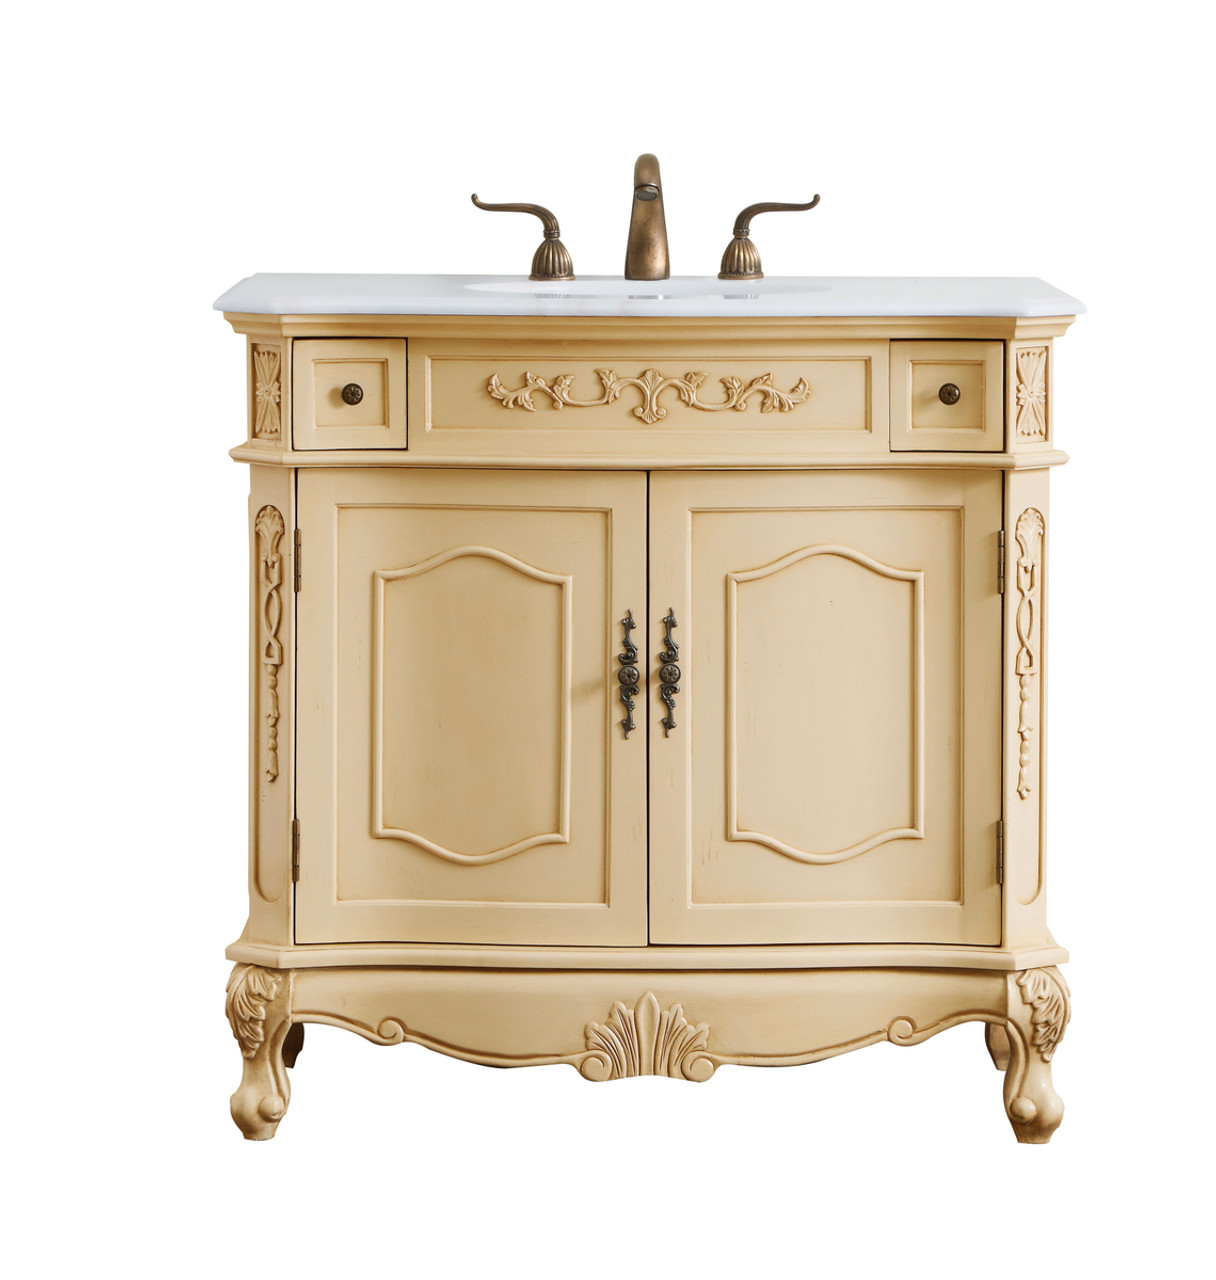 Elegant Kitchen and Bath VF10136LT-VW 36 inch Single Bathroom vanity in light antique beige with ivory white engineered marble